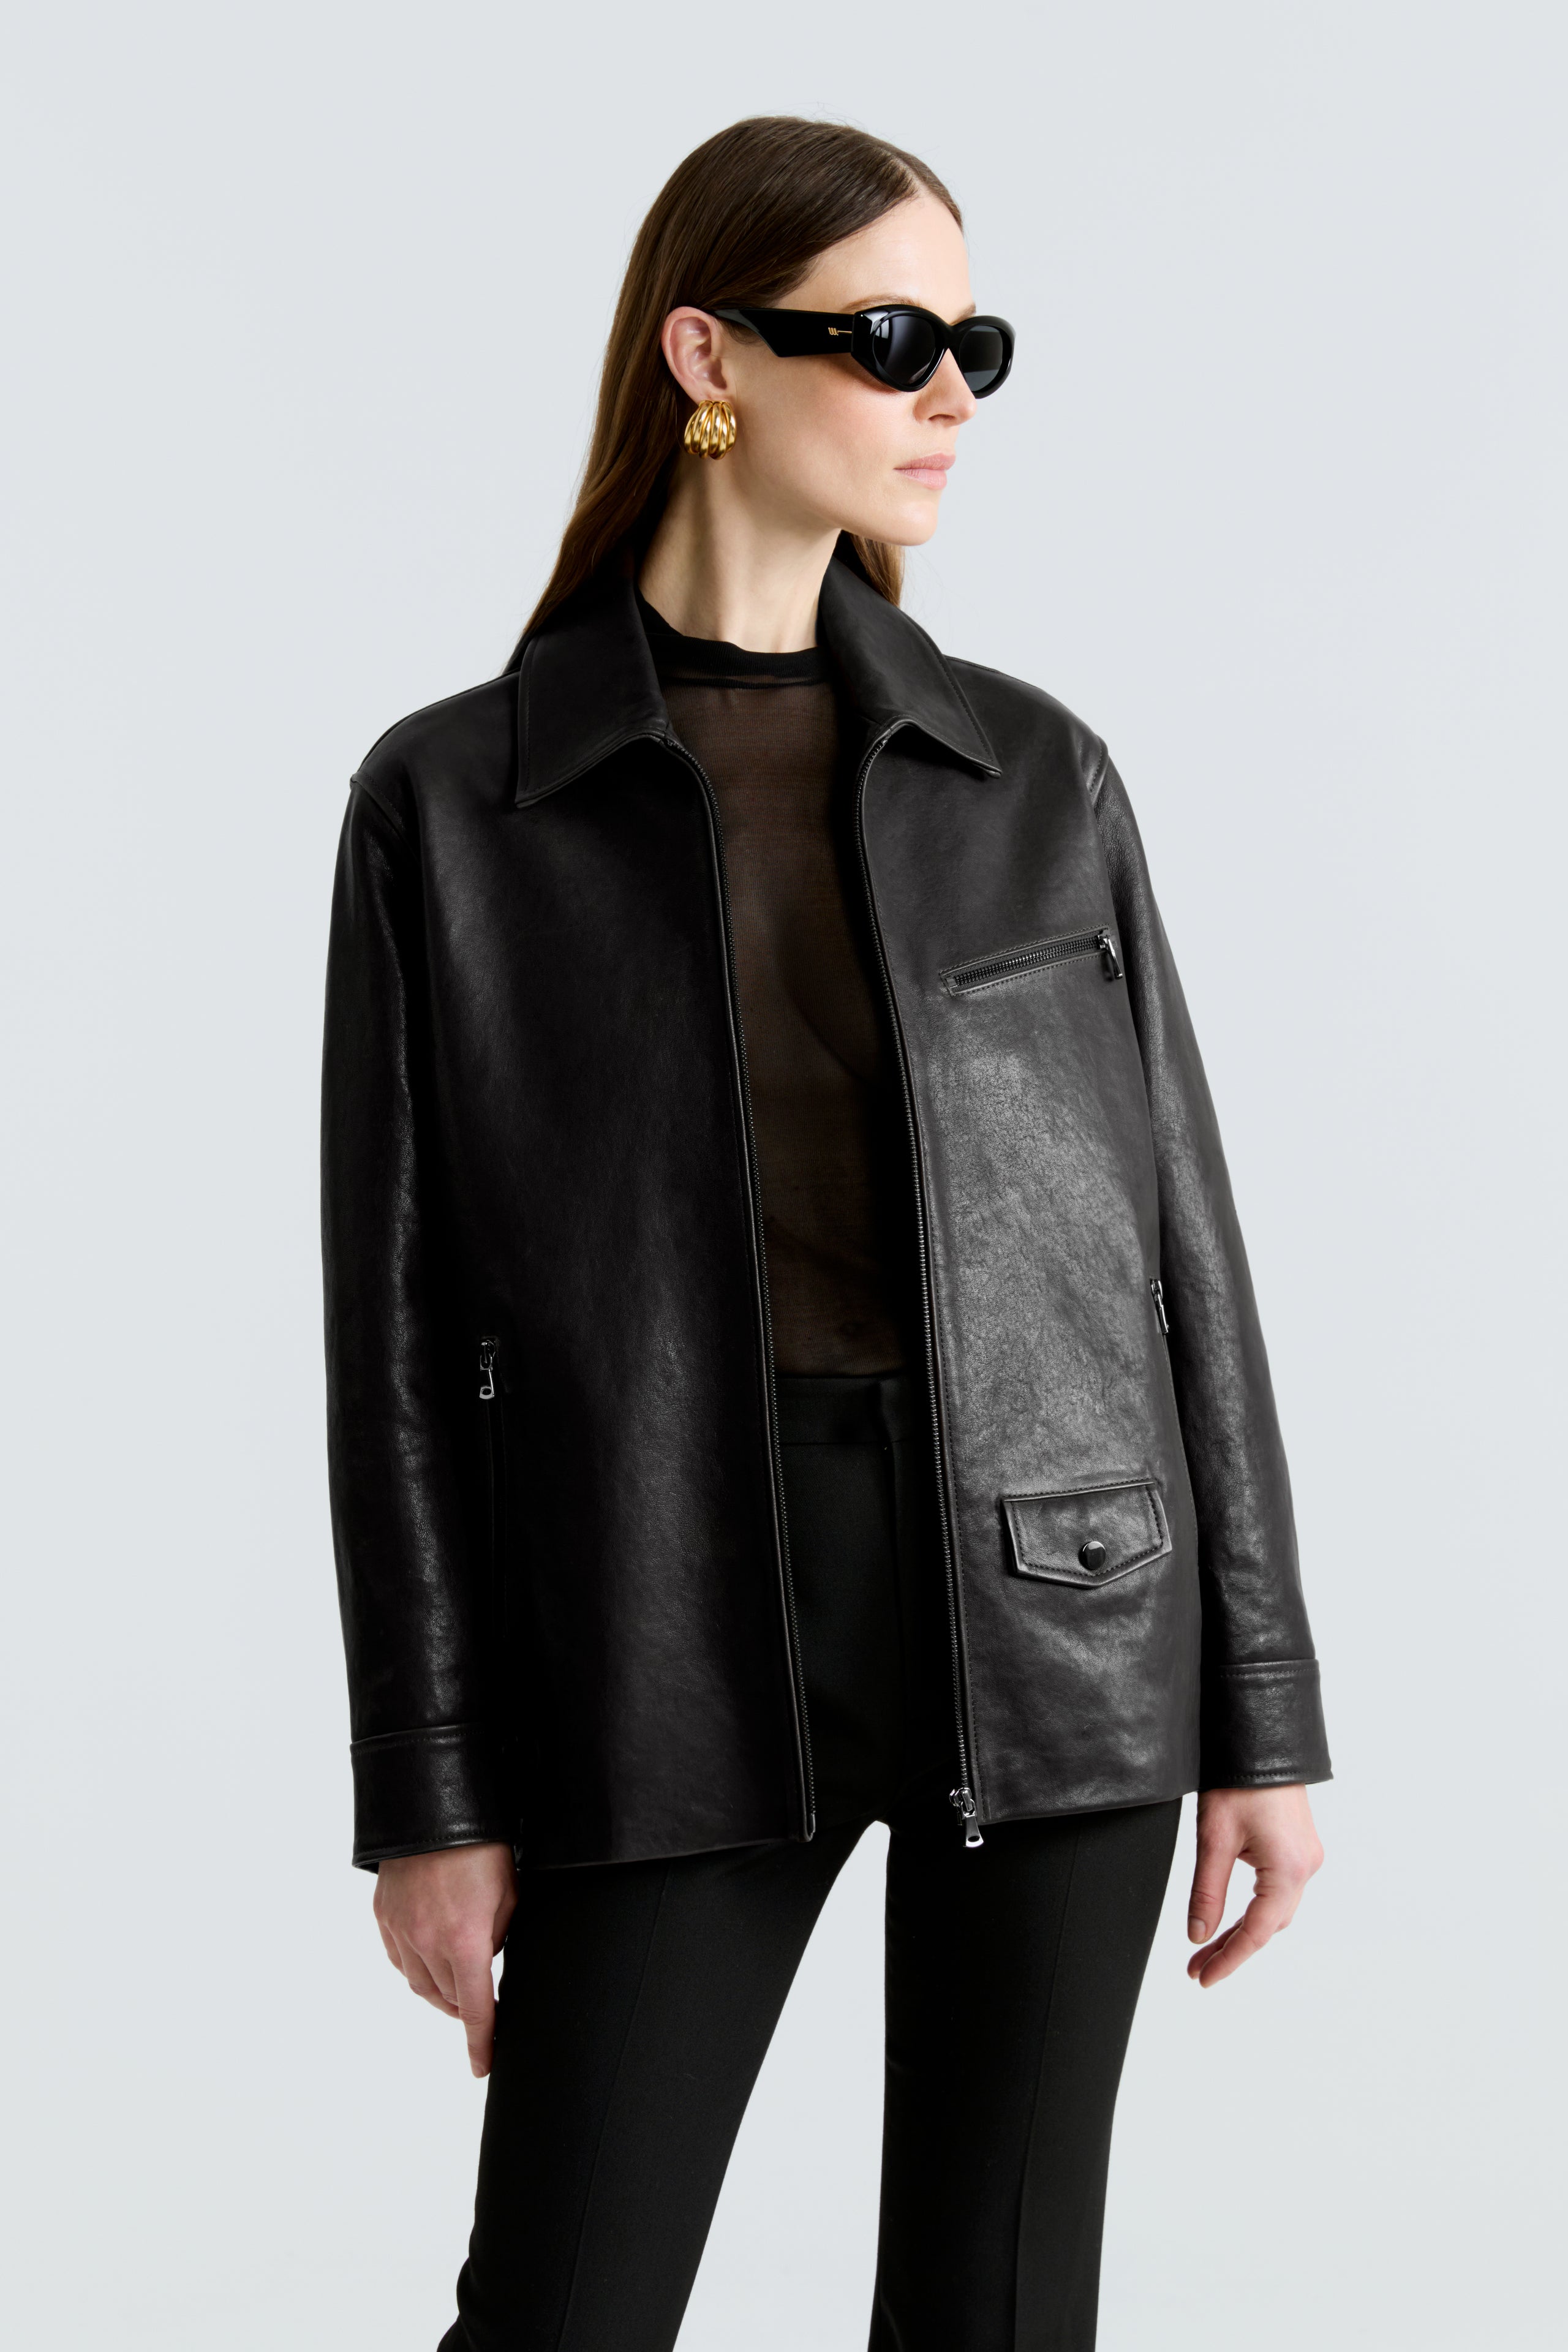 Model is wearing the Rayan Black Utilitarian Leather Jacket Close Up